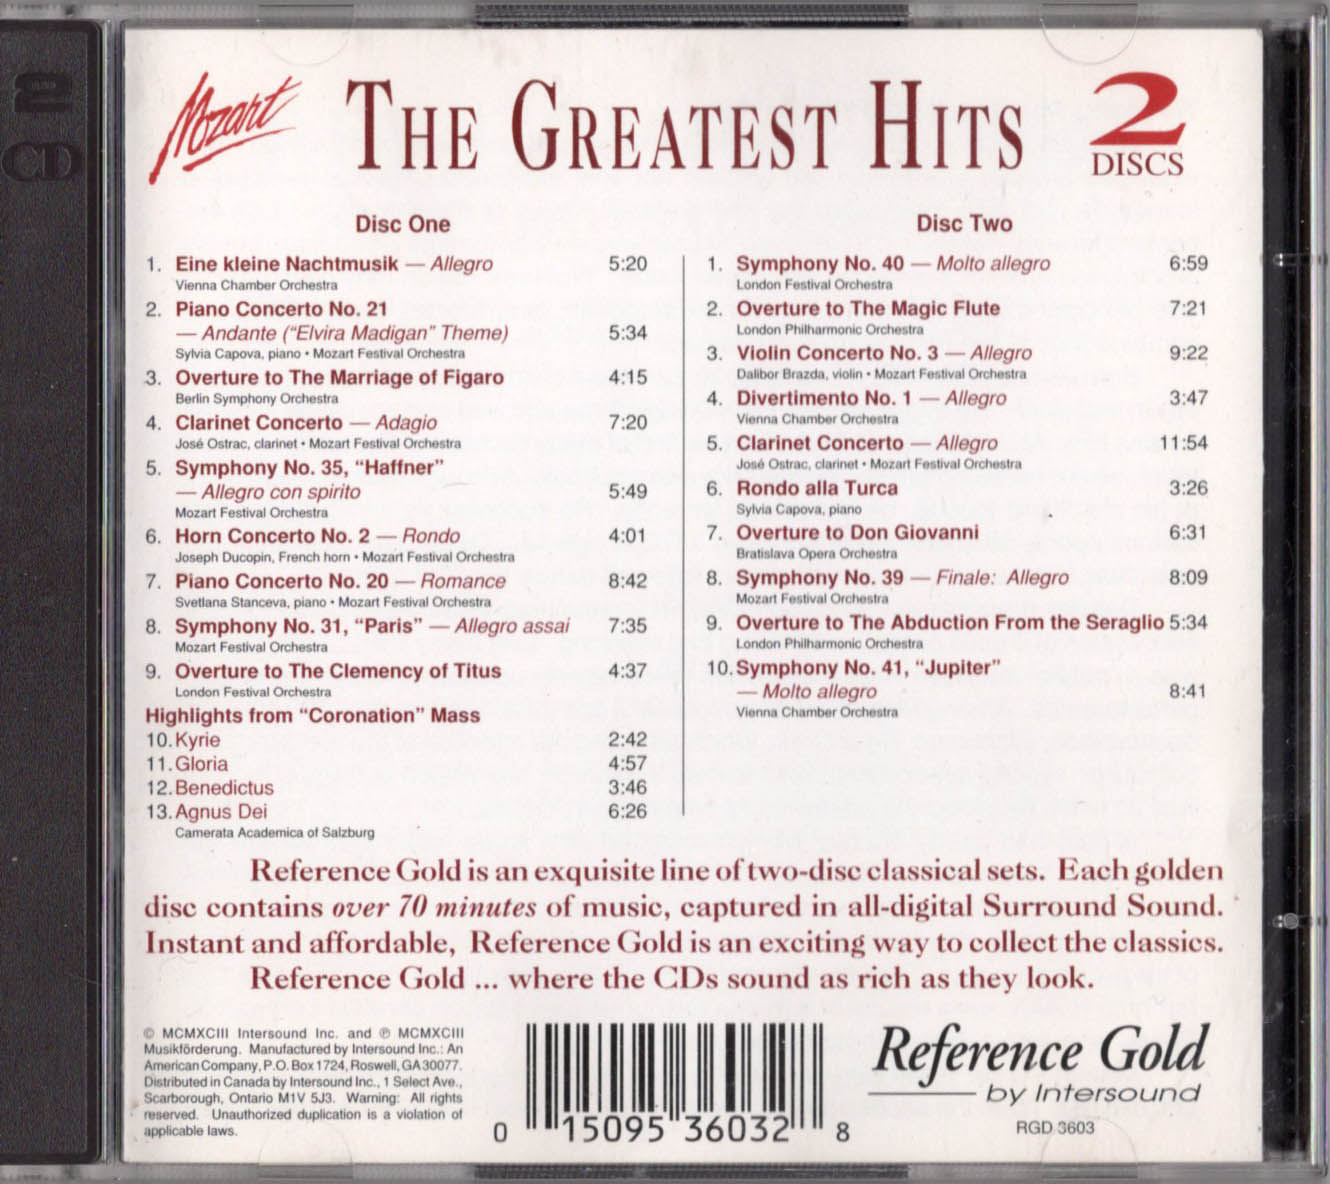 MOZART: THE GREATEST HITS - 1993 Double Disc CD